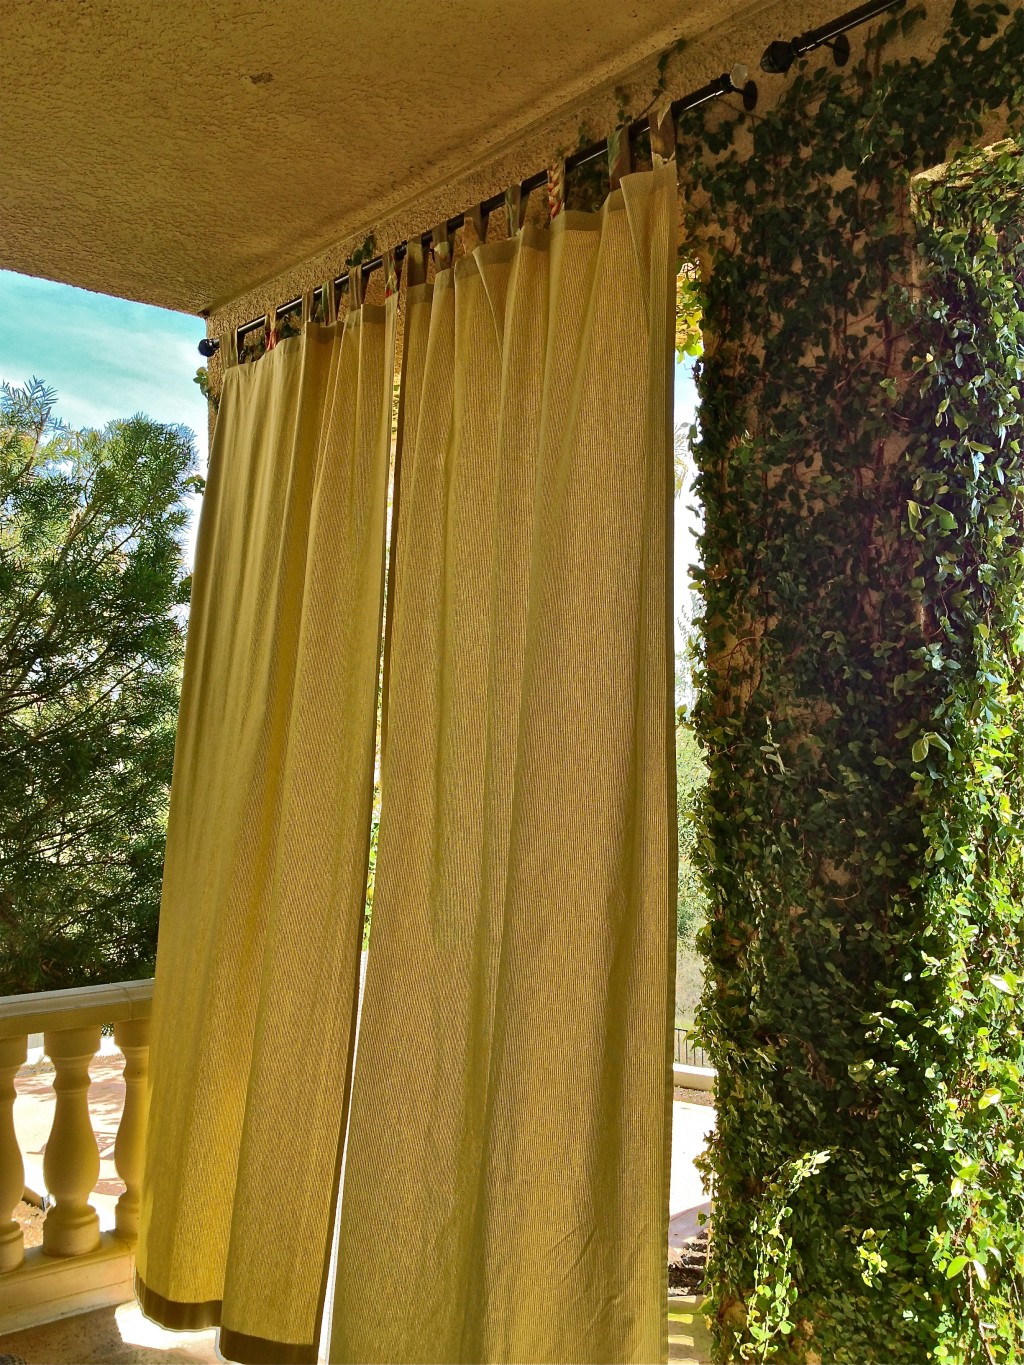 Outdoor Privacy Curtains in Curtain